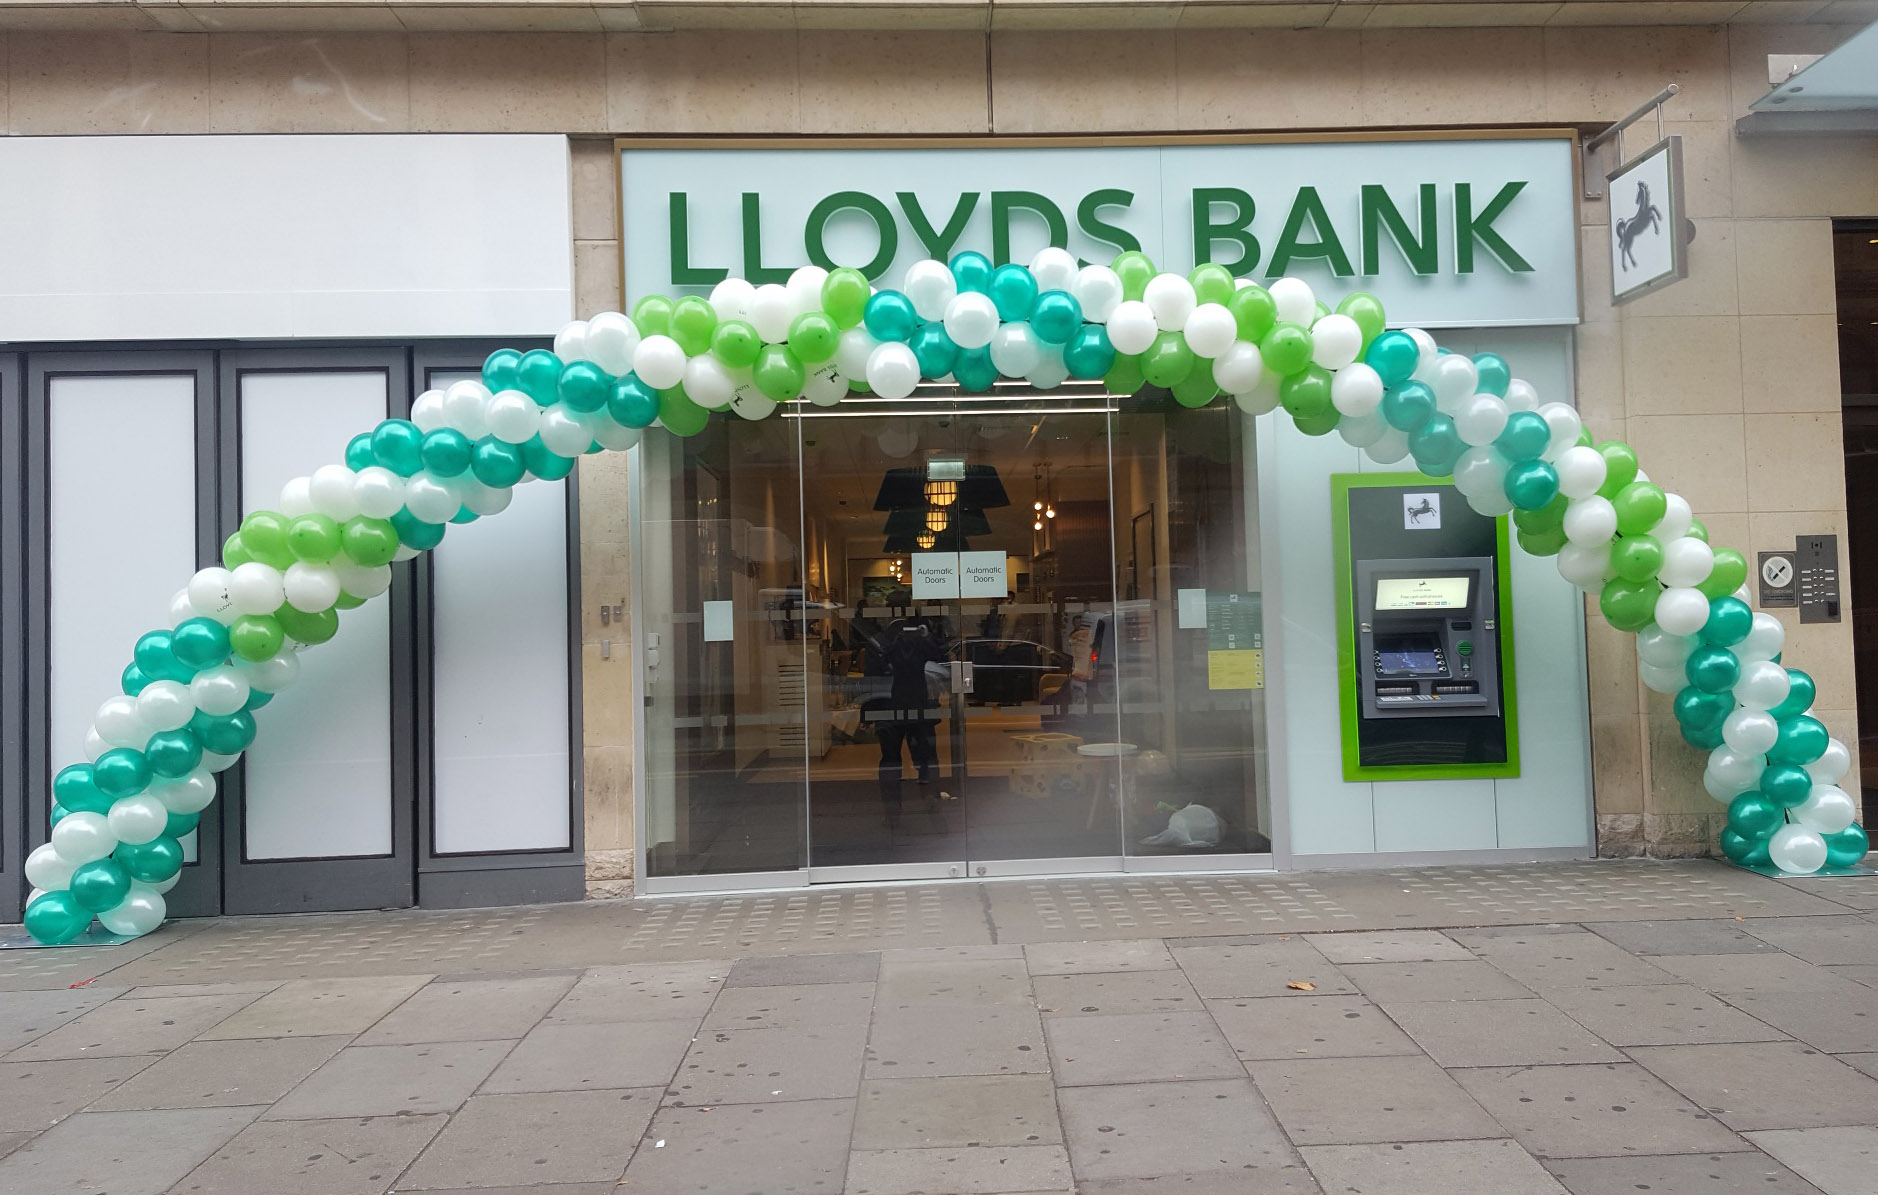 Green and White Spiral Balloon Arch created for Lloyds Bank